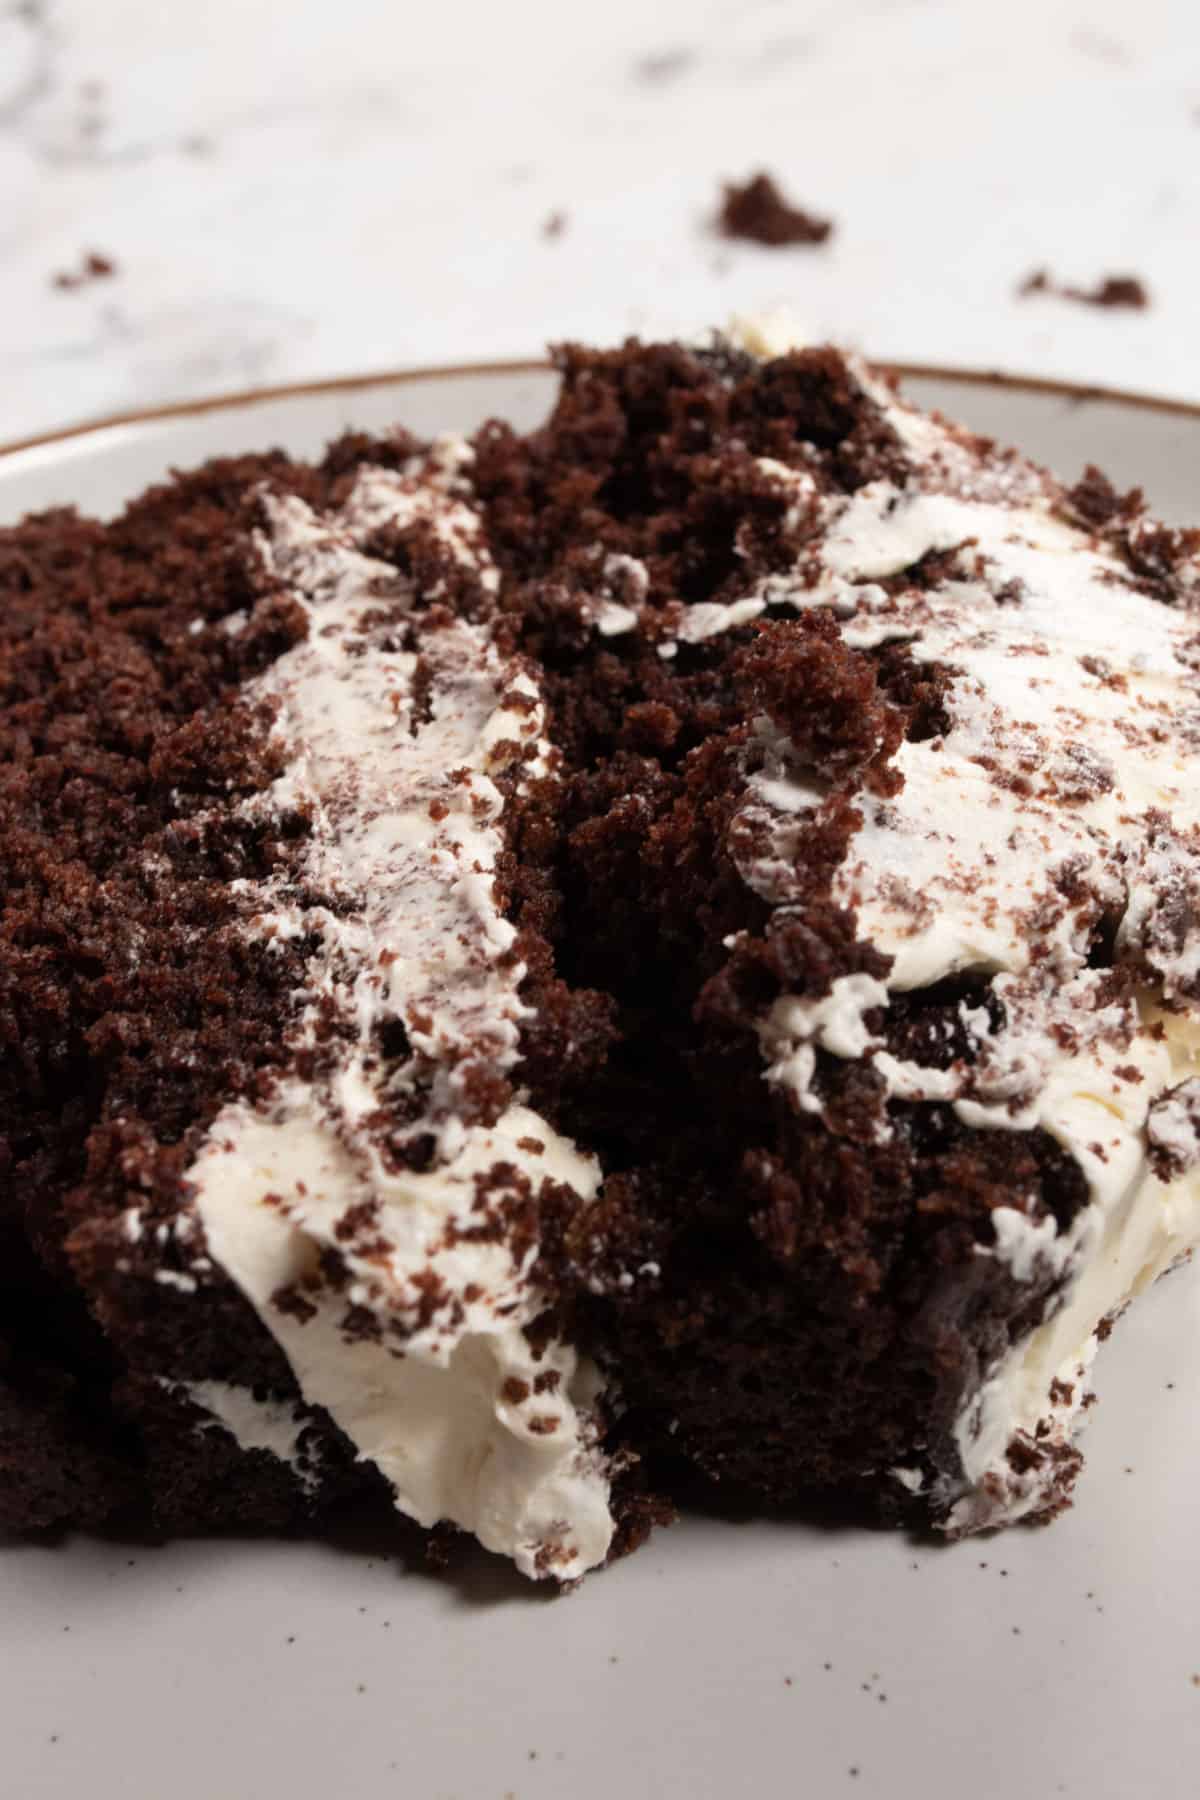 A very large creamy slice of vegan brownie cake sitting on a brown-rimmed white plate.